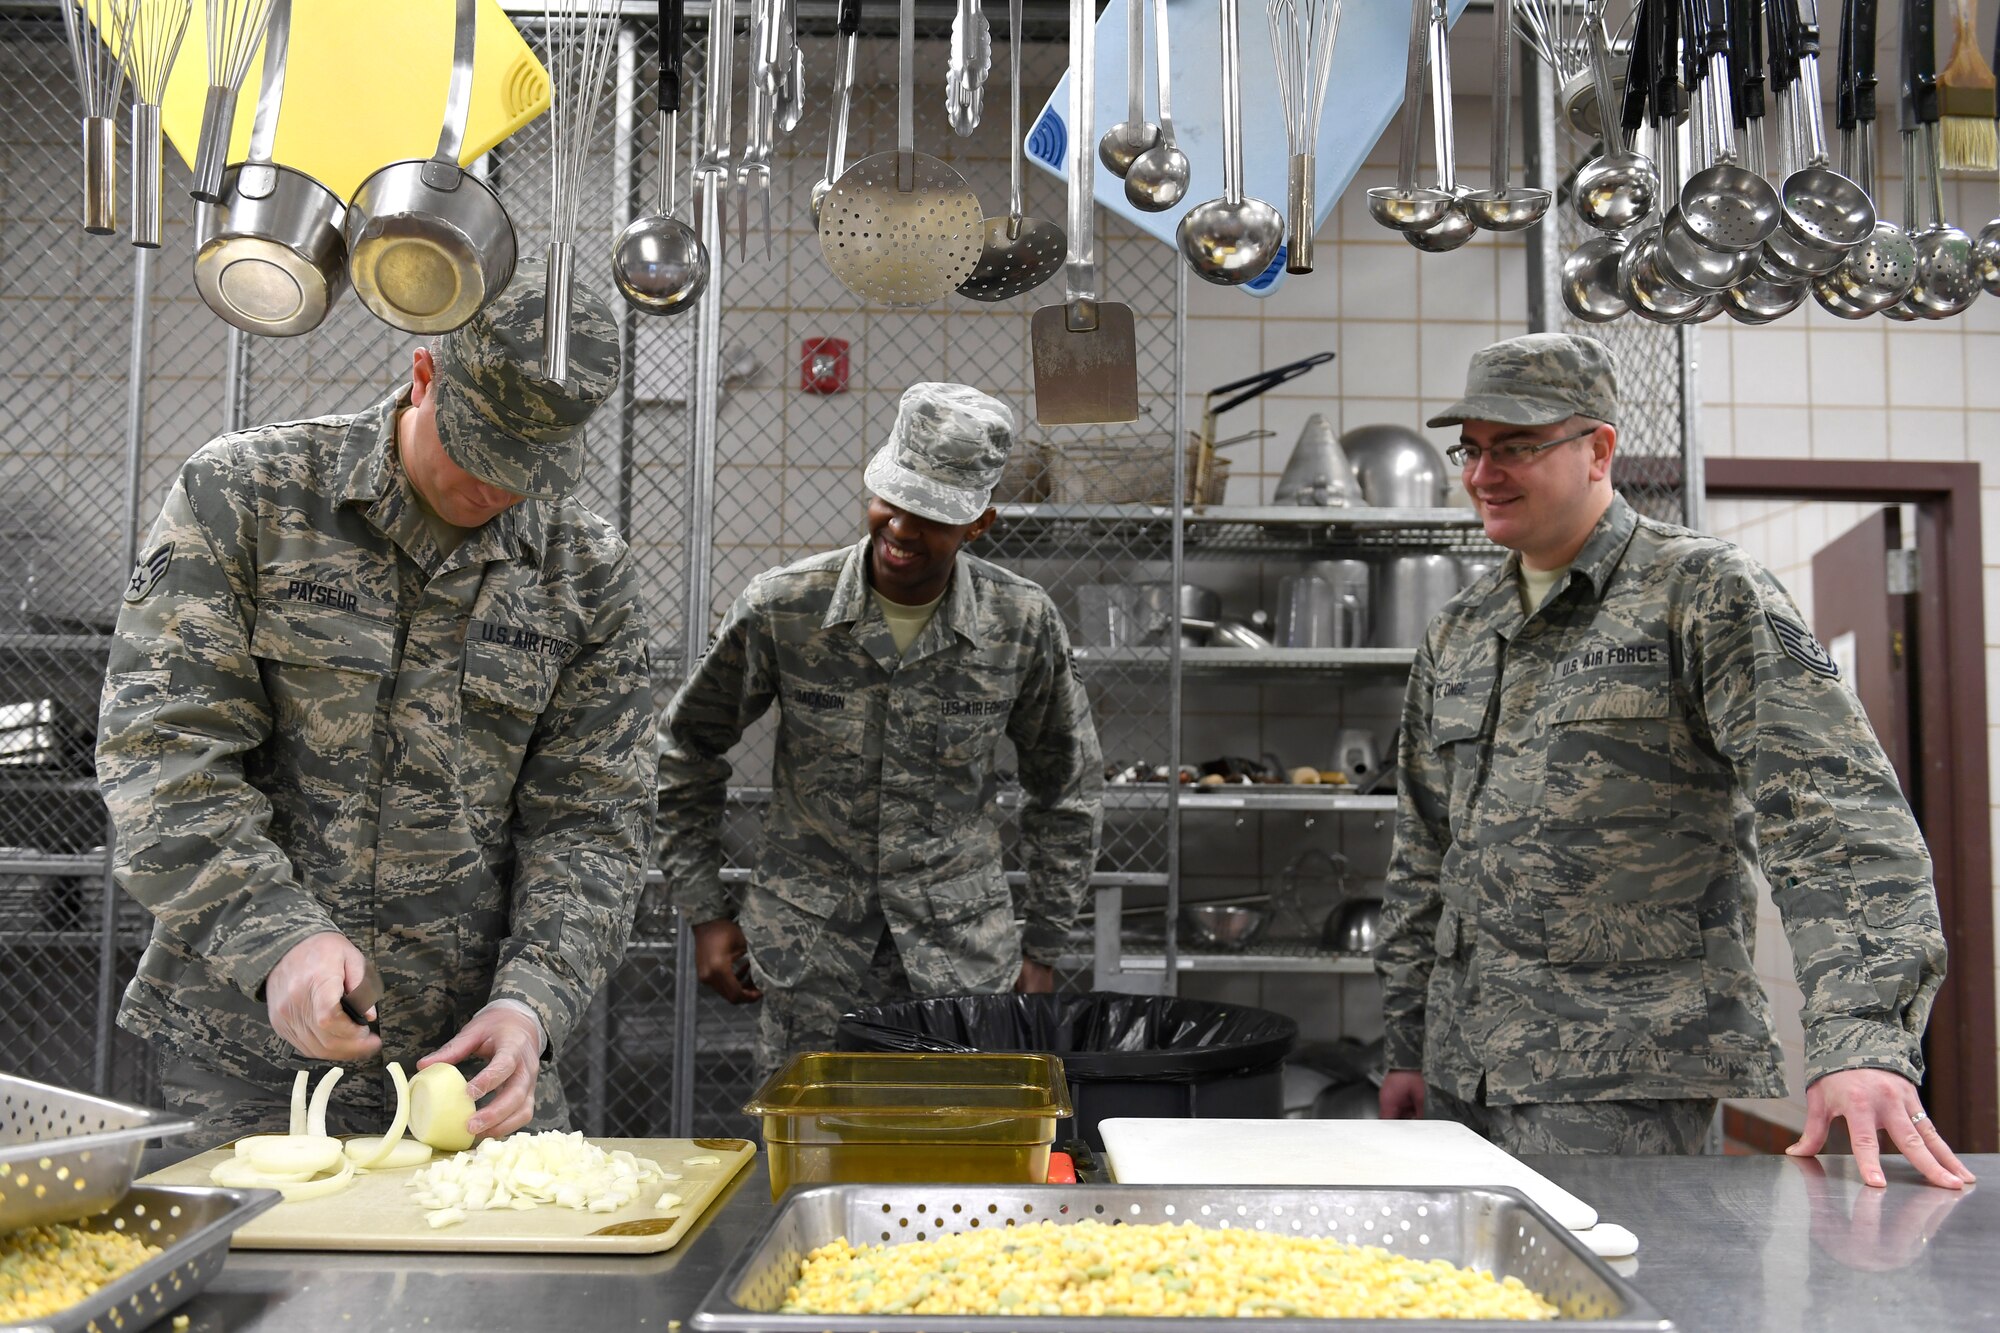 Members ANG and ARS prepare lunch during drill weekend